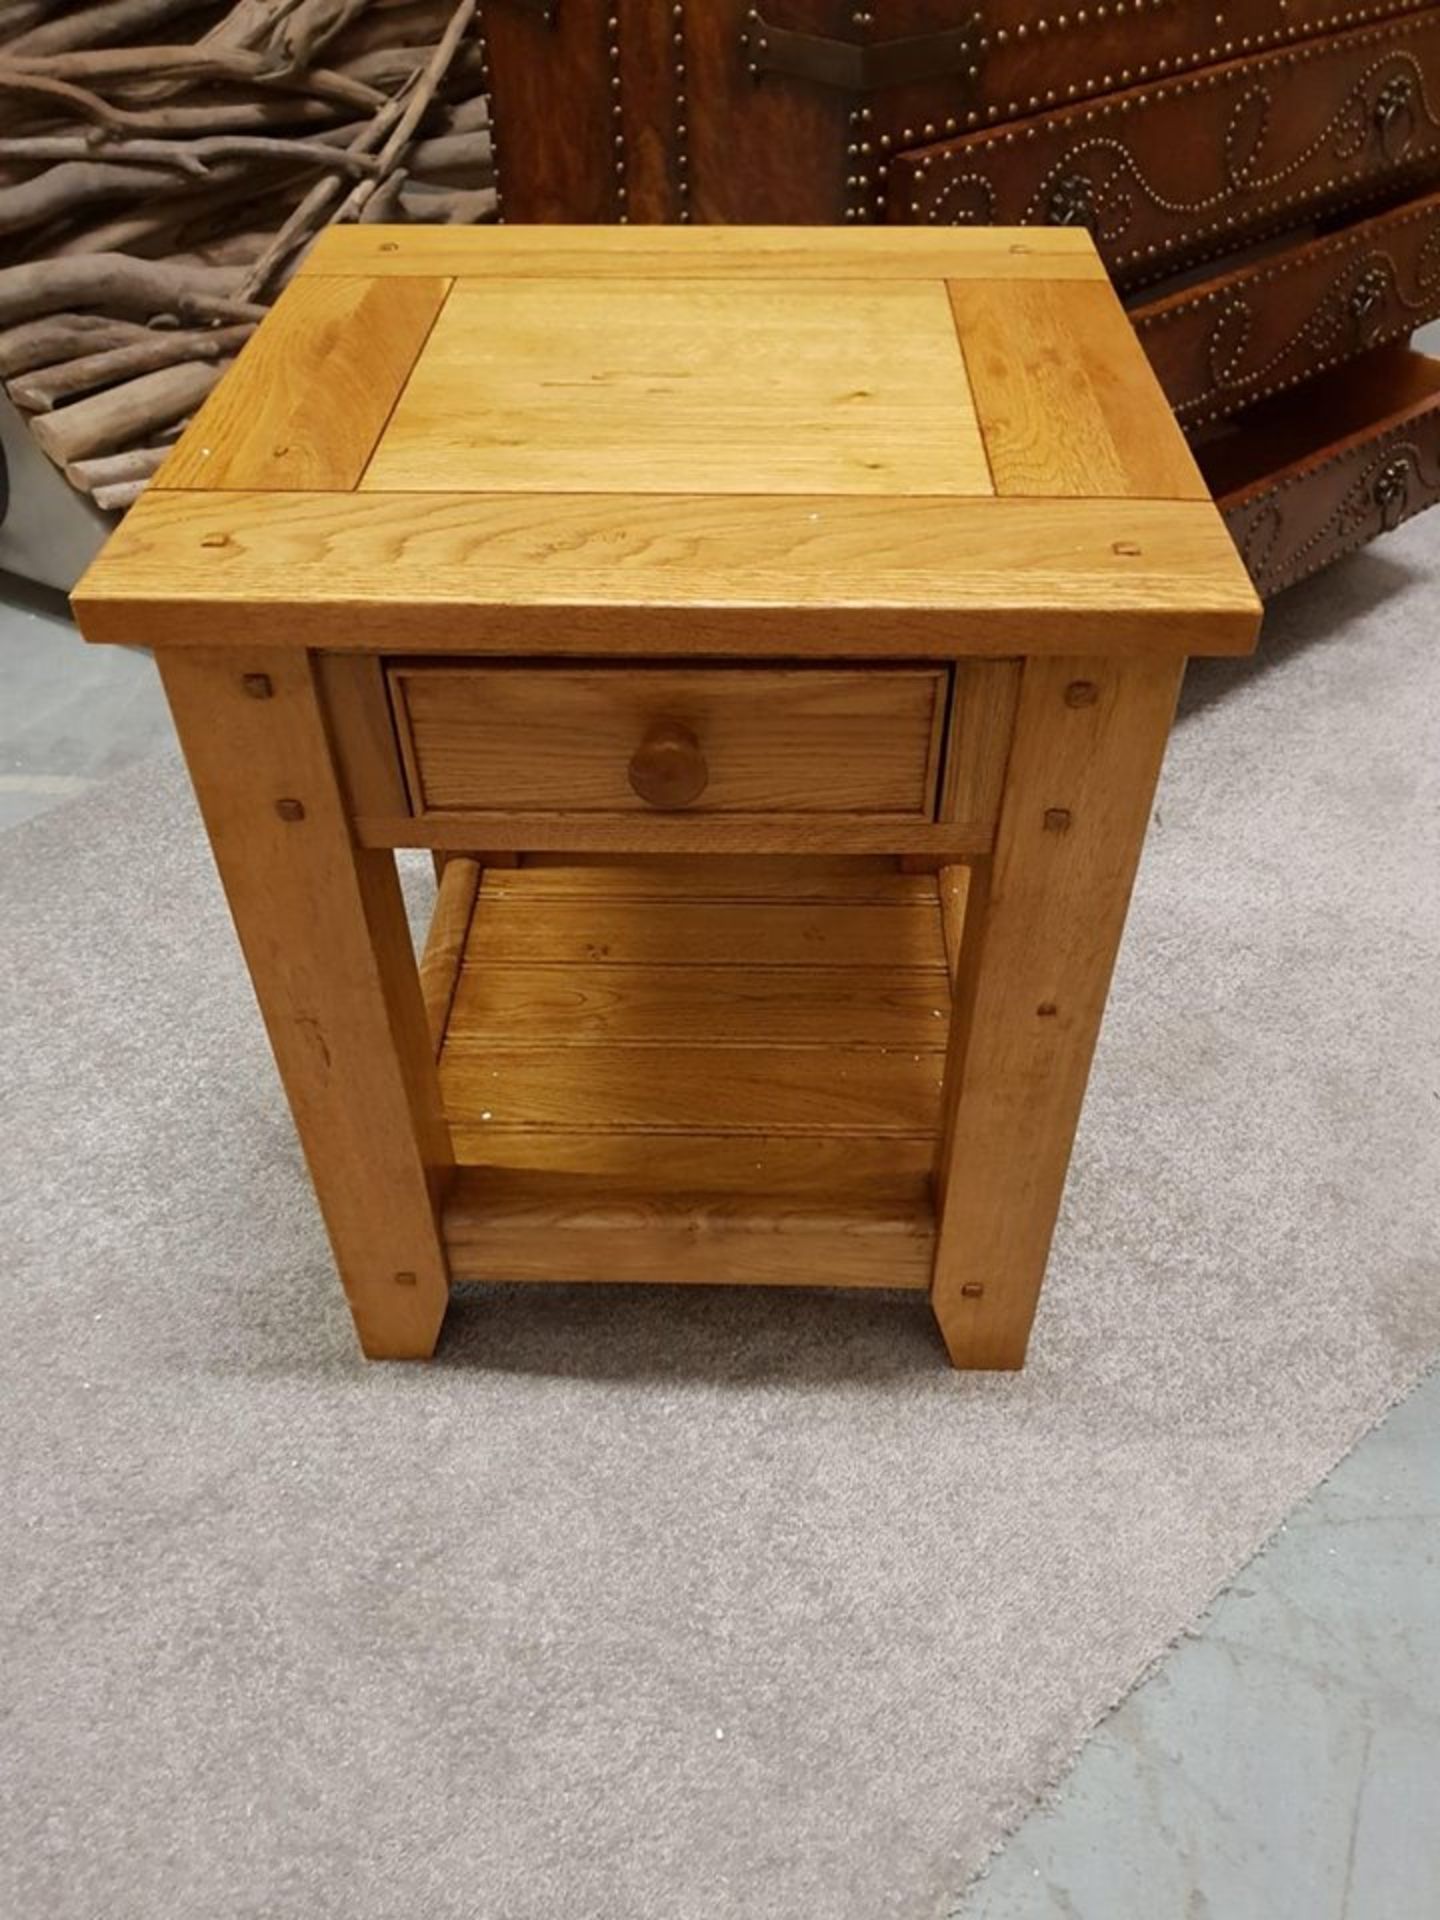 Side Table - Wentworth Oak Side Table Crafted Using Hand Selected Solid Oak Wood And Hand Distressed - Image 2 of 2